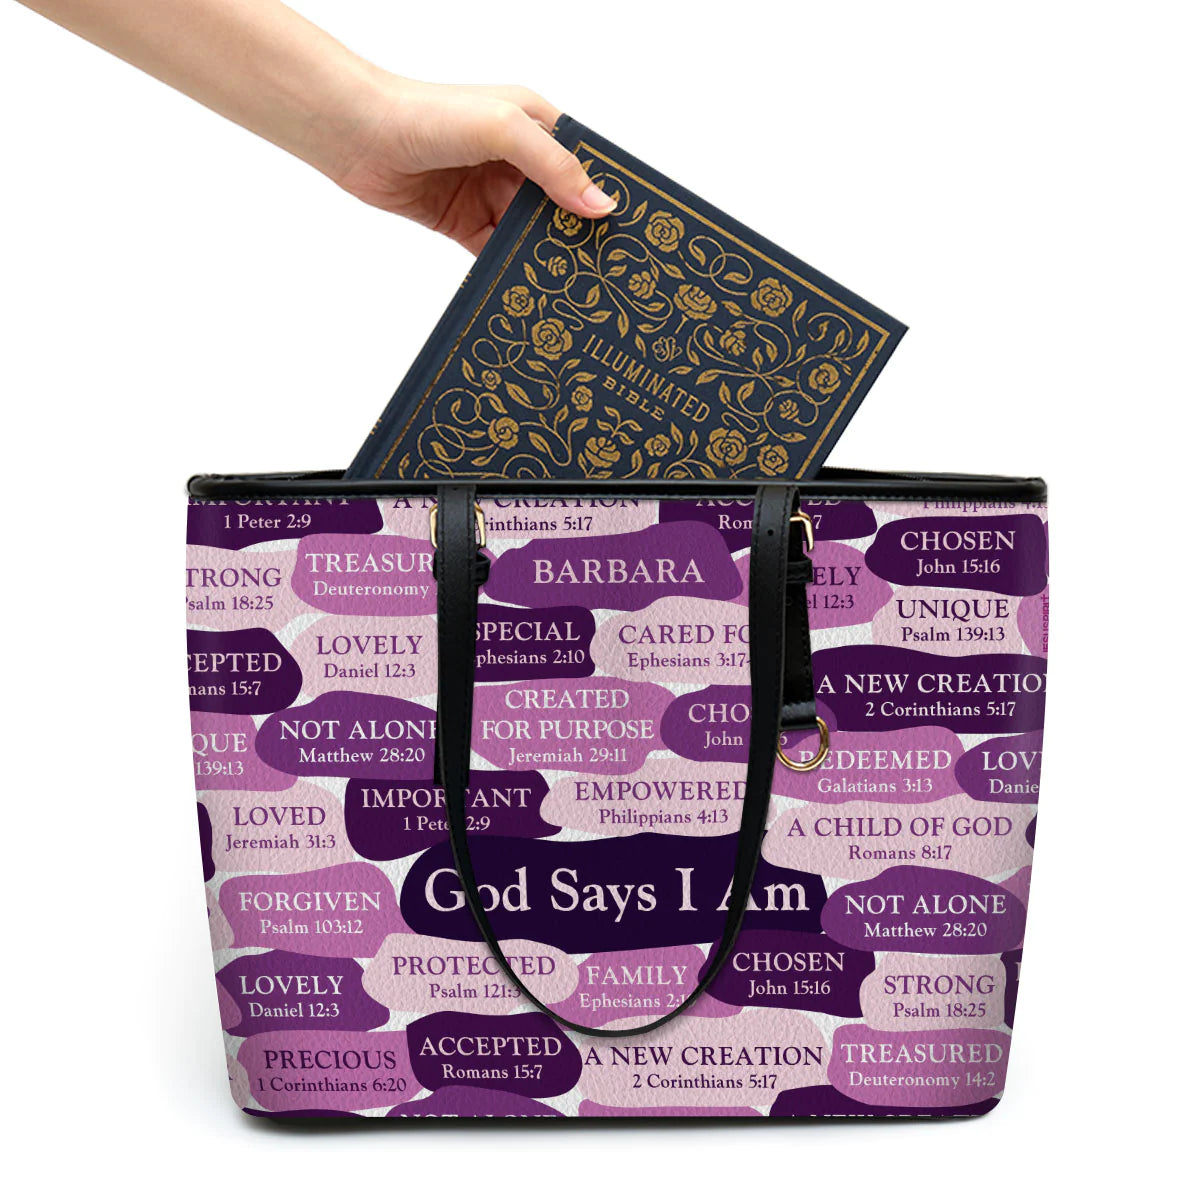 Christianart Designer Handbags, What God Says About You, Personalized Gifts, Gifts for Women. - Christian Art Bag